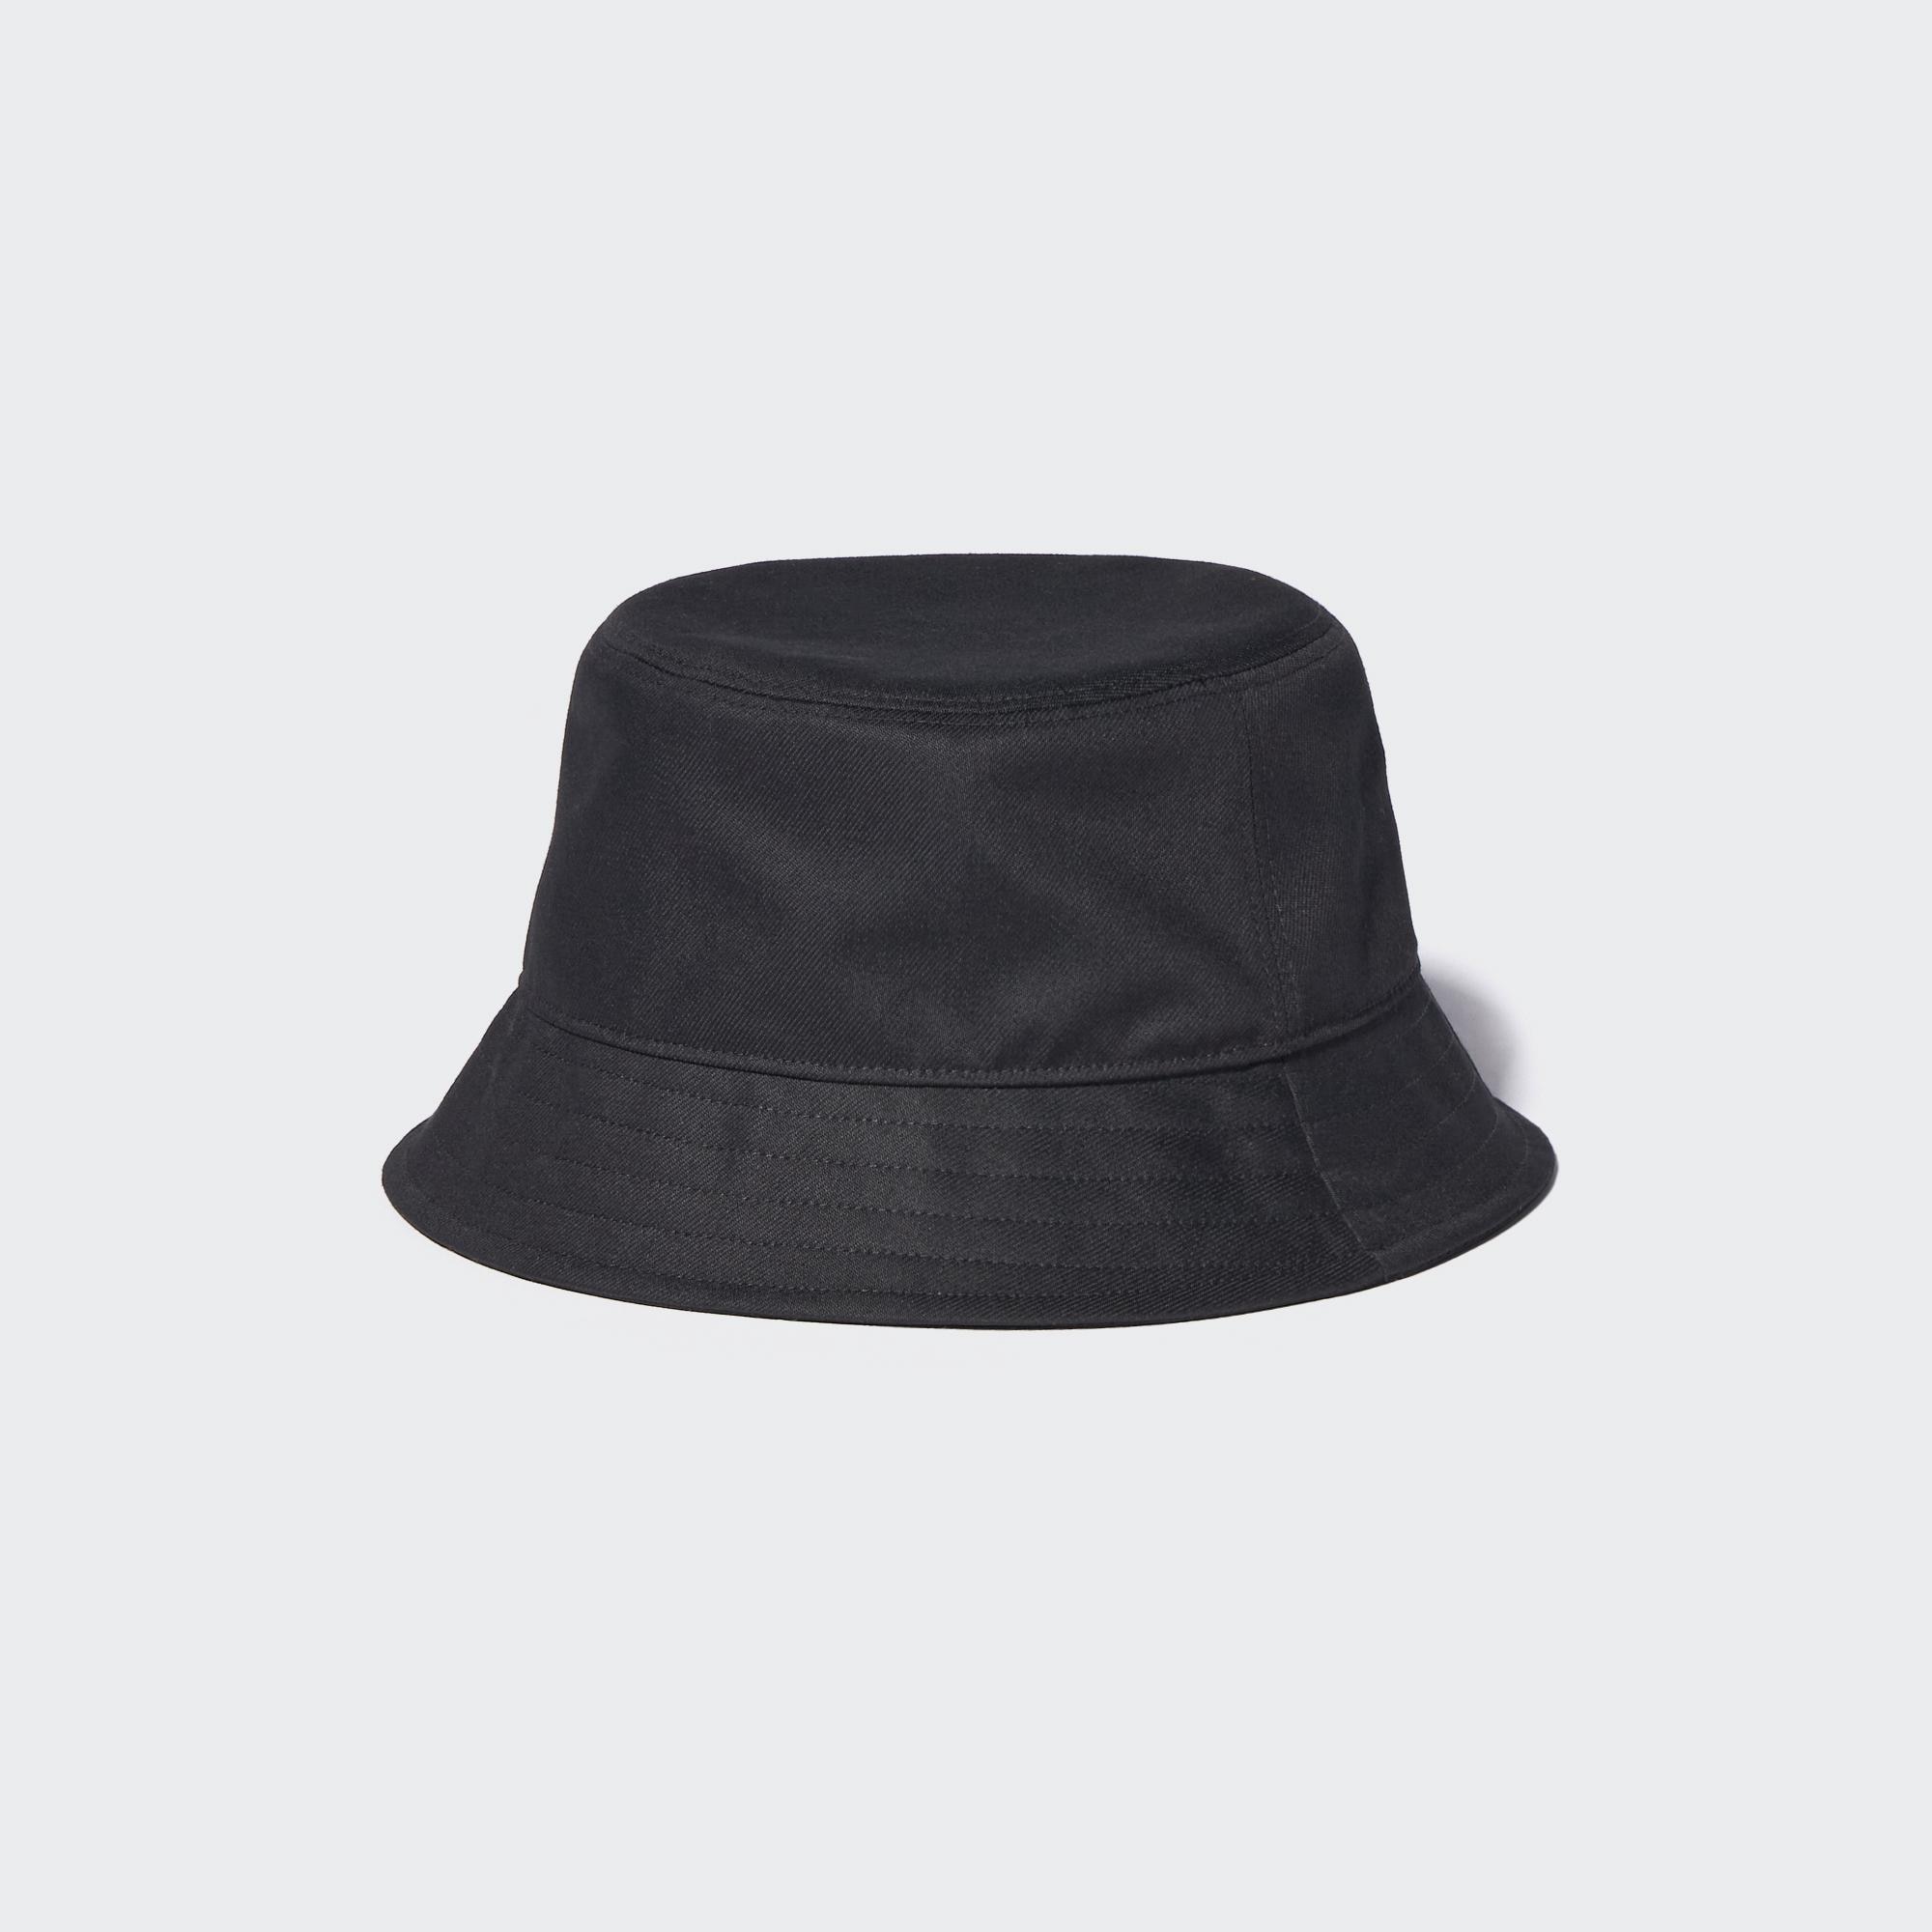 Uniqlo JW Anderson Bucket Hat Mens Fashion Watches  Accessories Caps   Hats on Carousell